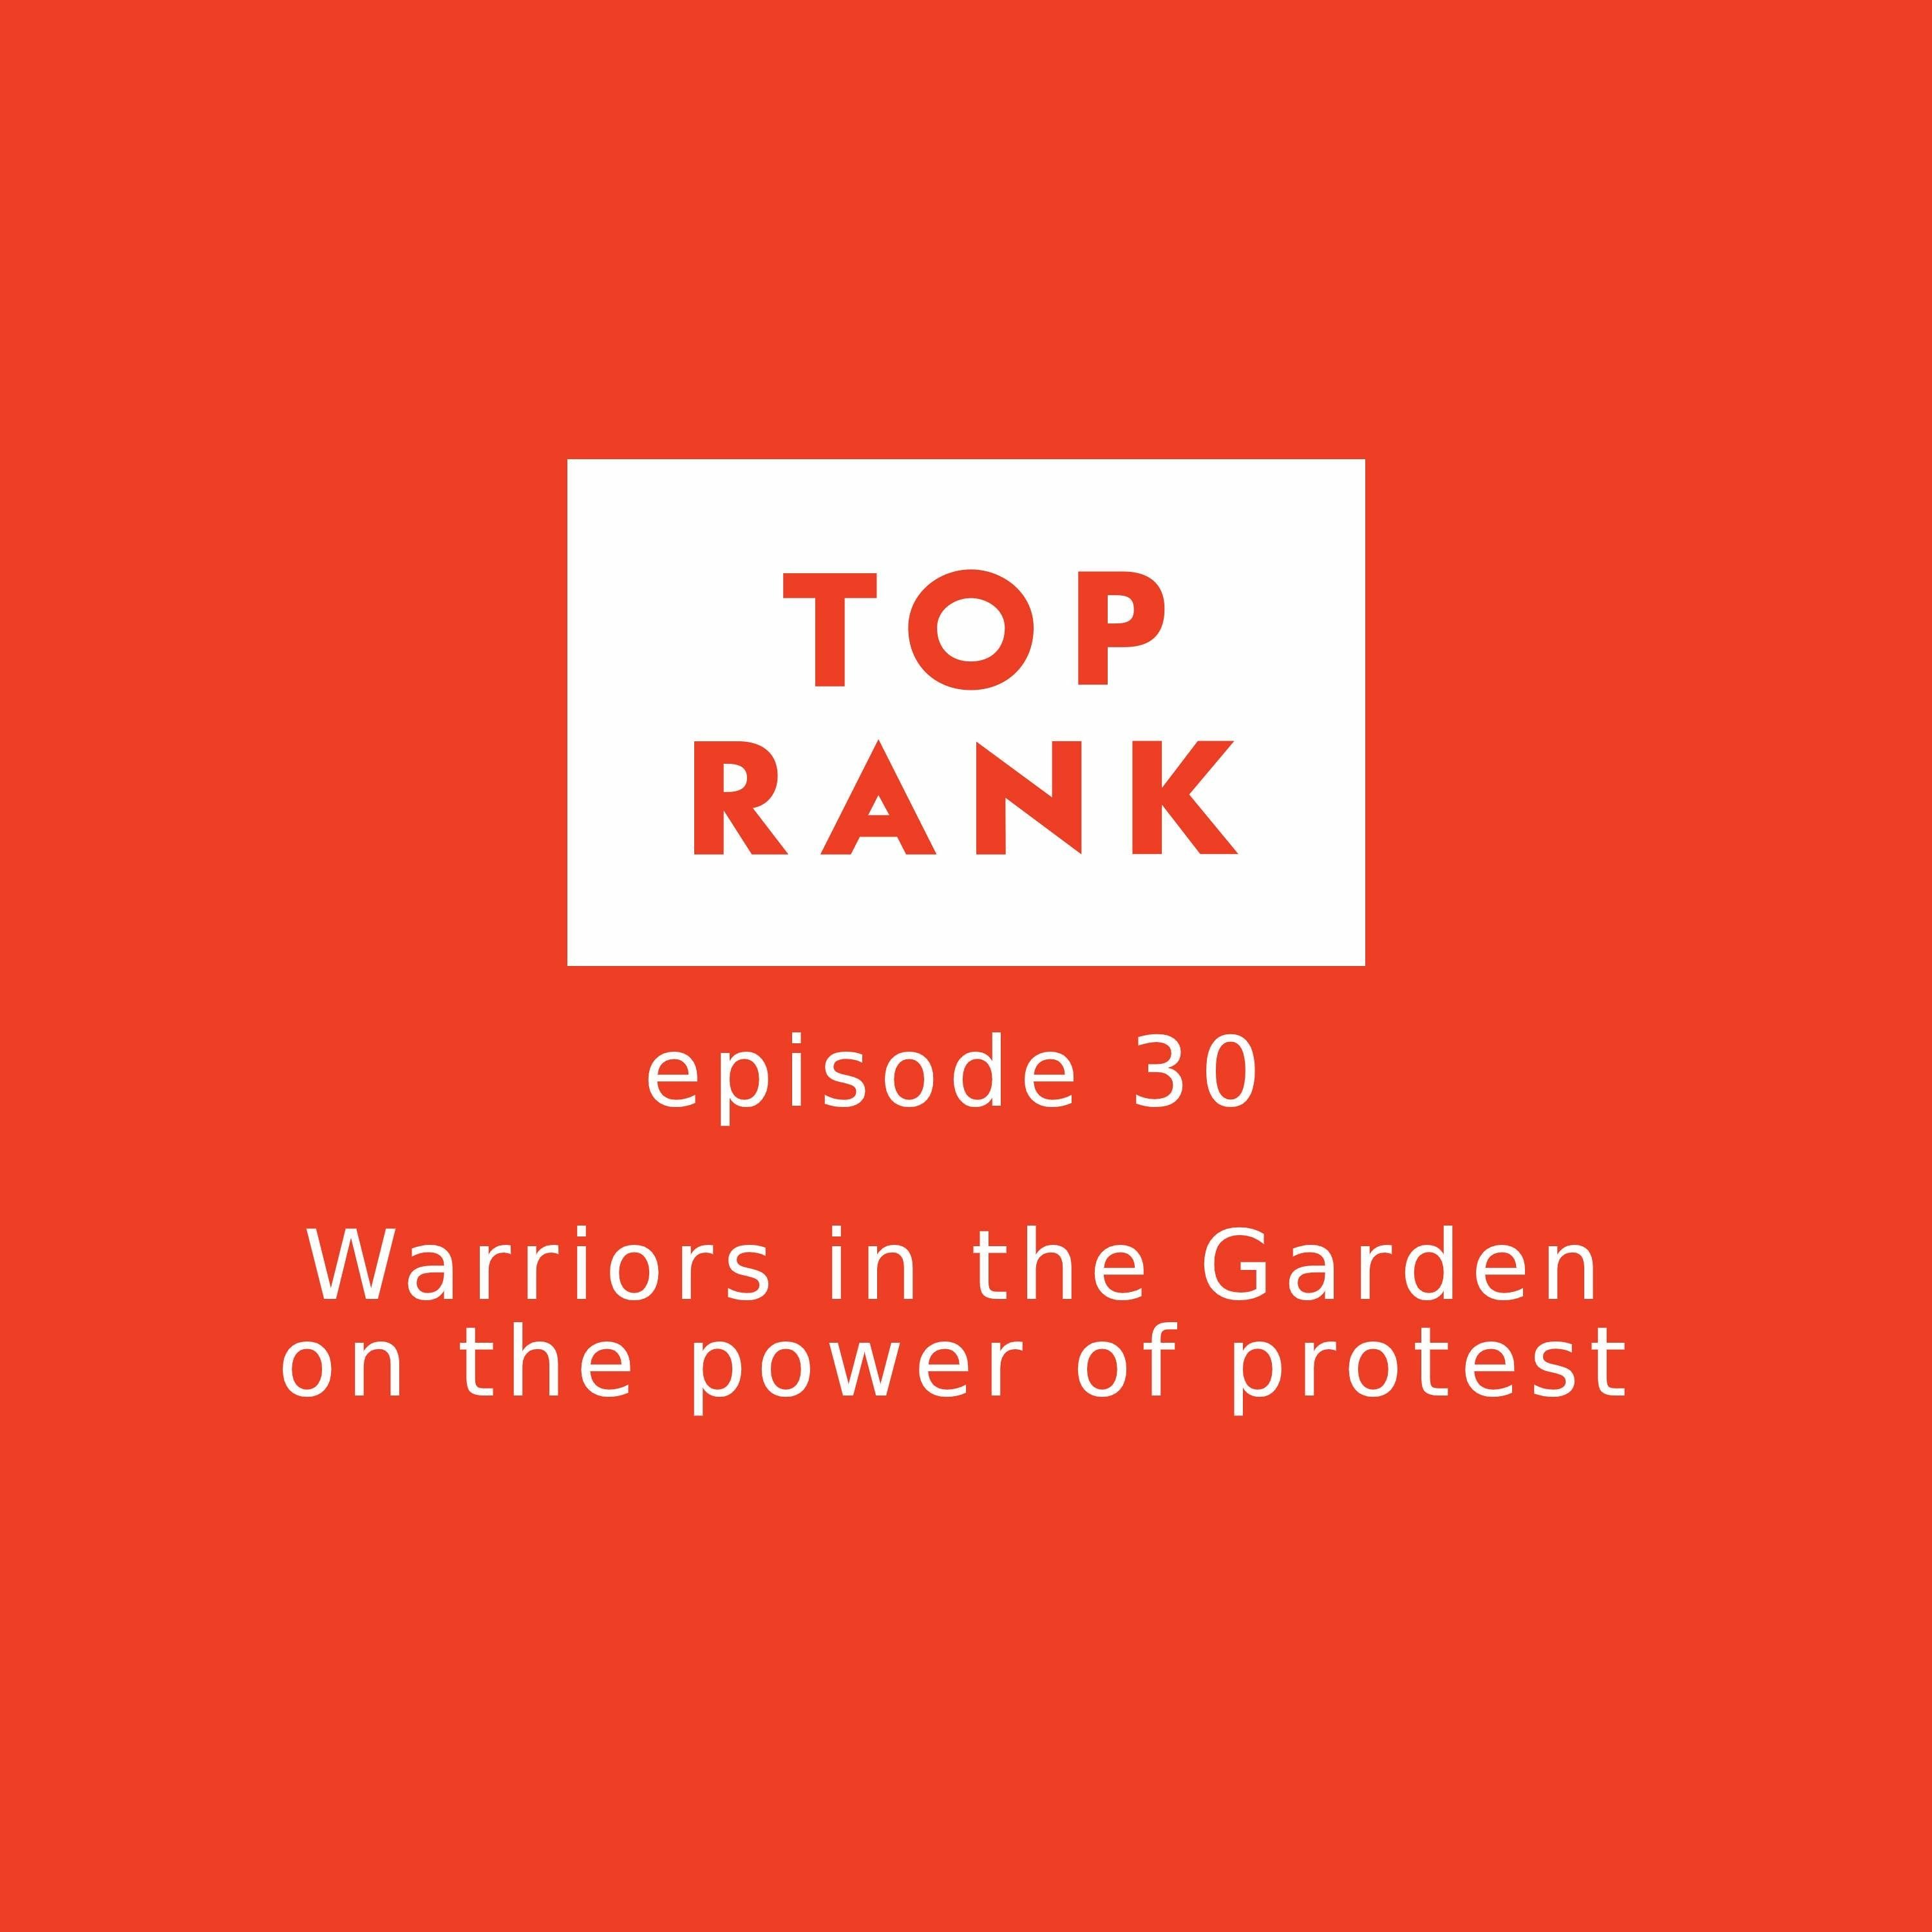 Epsiode 30: Warriors in the Garden on the Power of Protest